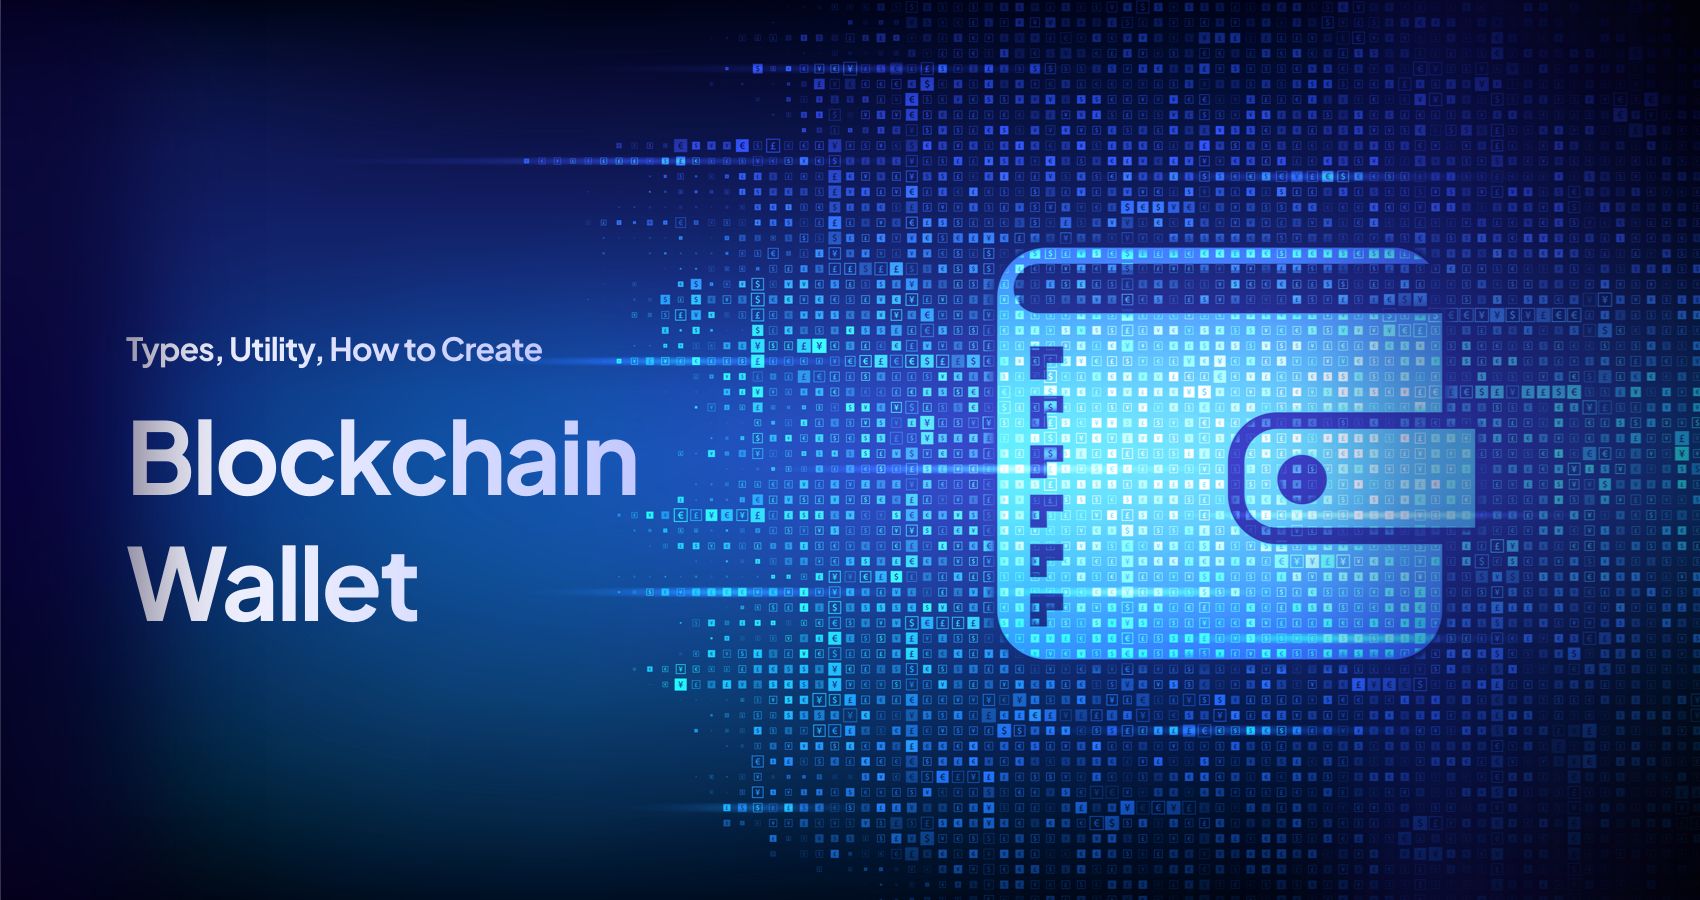 https://www.creative-tim.com/blog/content/images/2022/09/what-is-blockchain-a-wallet-1.jpg